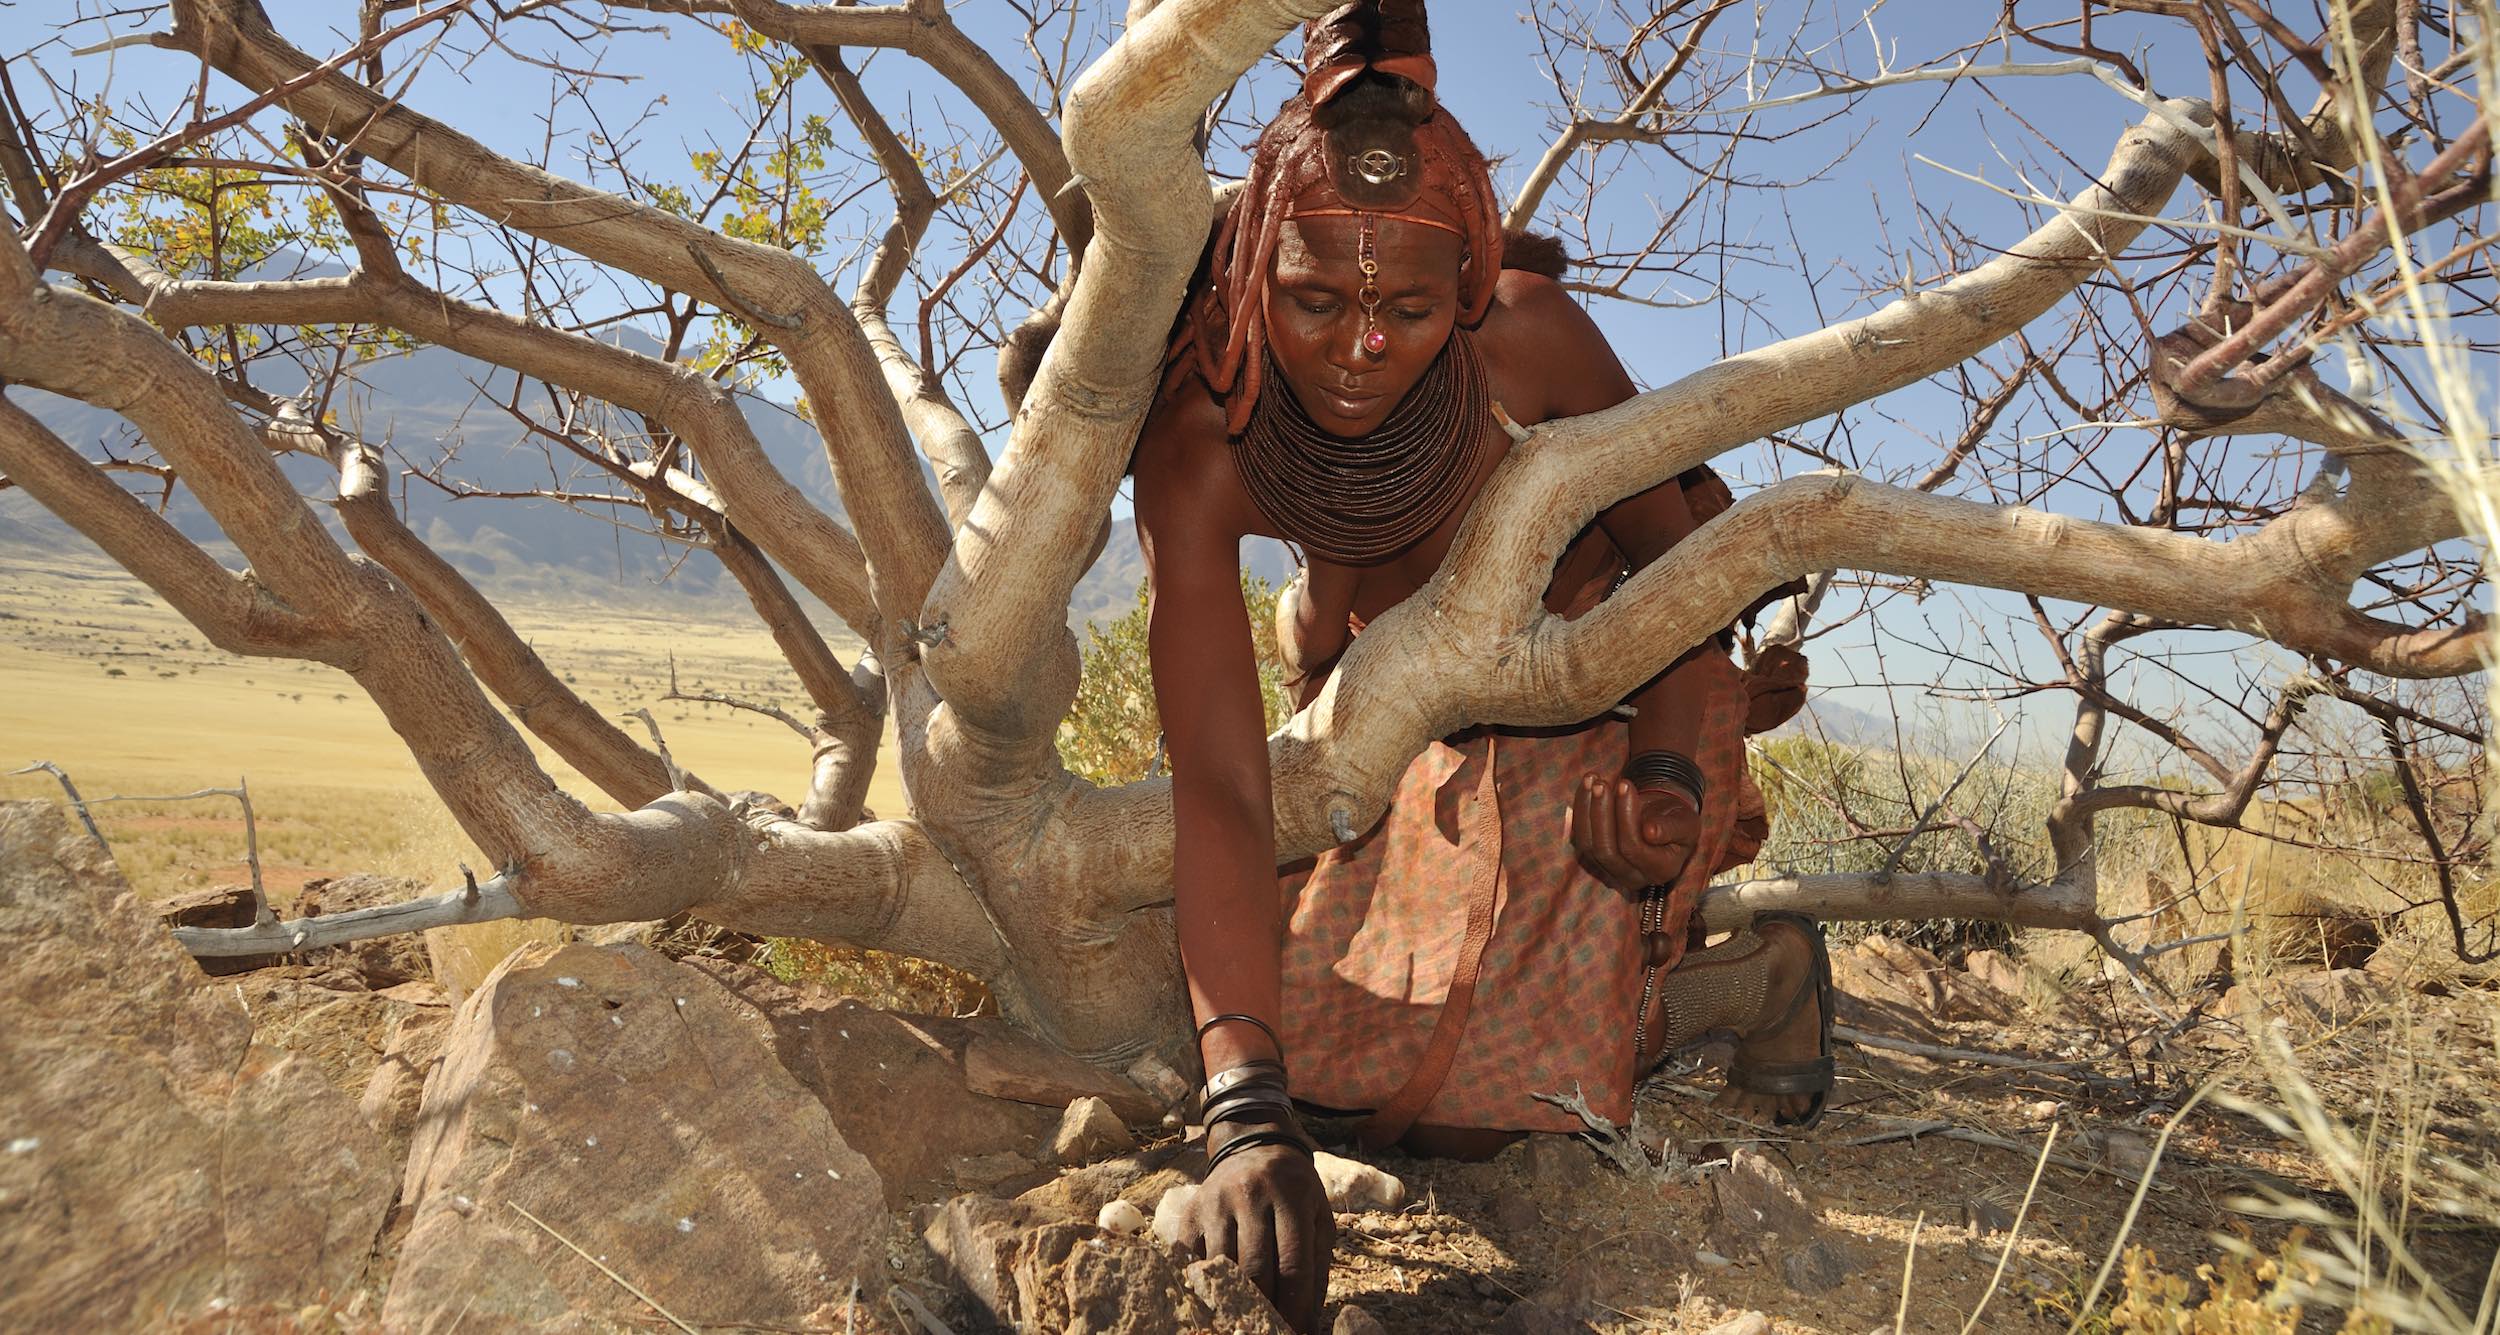 A Himba lady works in the bush.